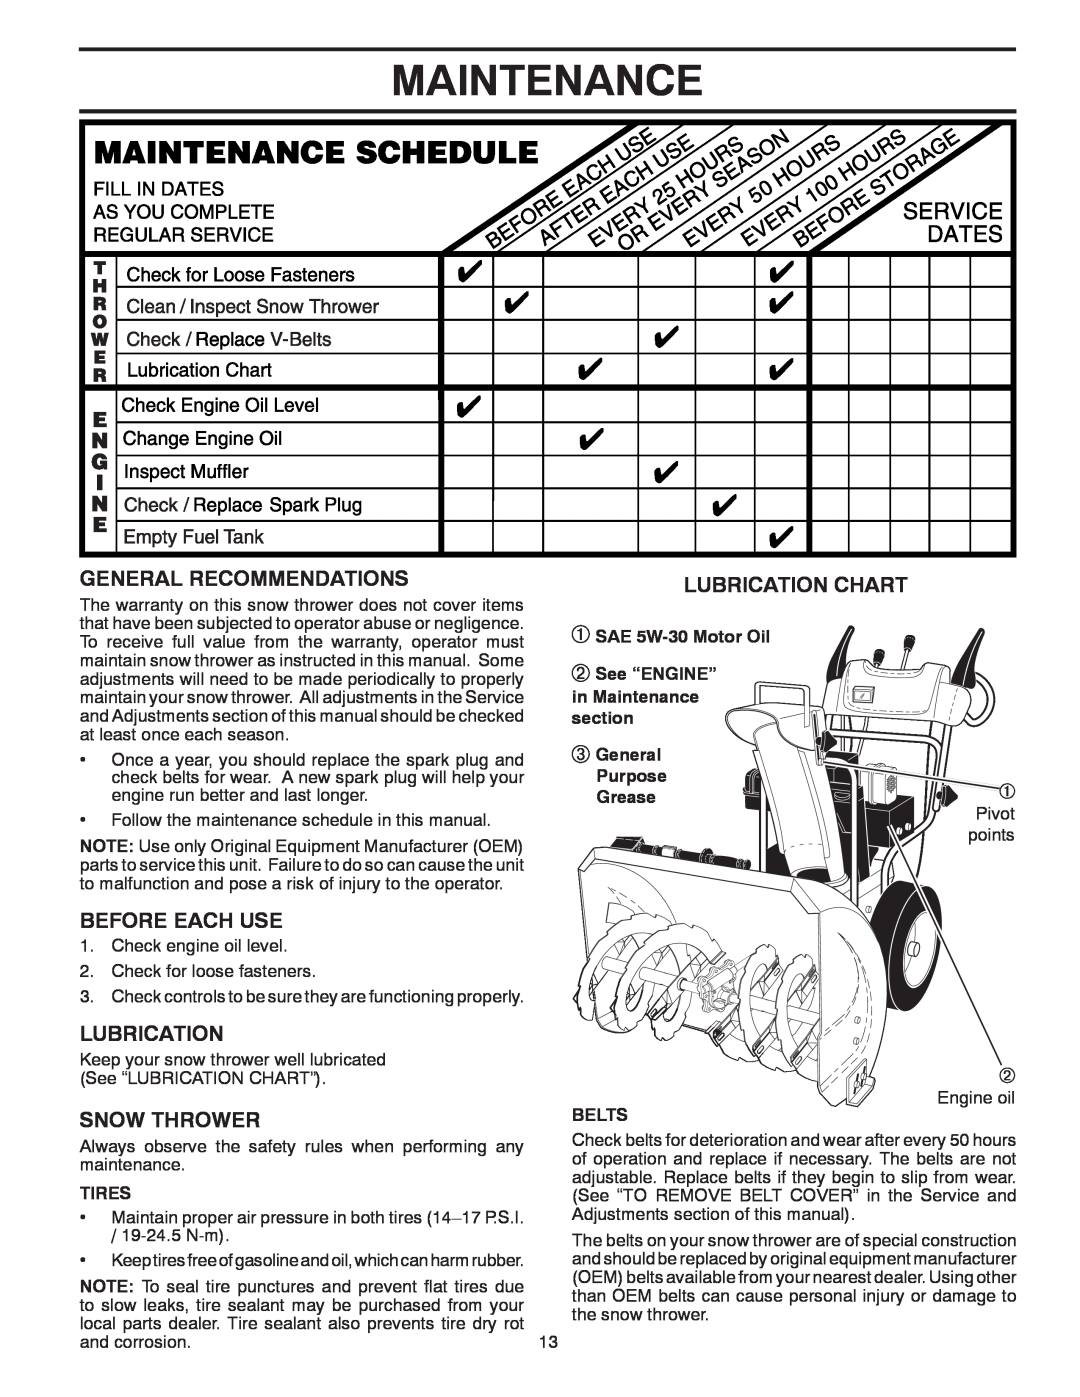 Poulan 96198002501 Maintenance, General Recommendations, Lubrication Chart, Before Each Use, Snow Thrower, Purpose Grease 